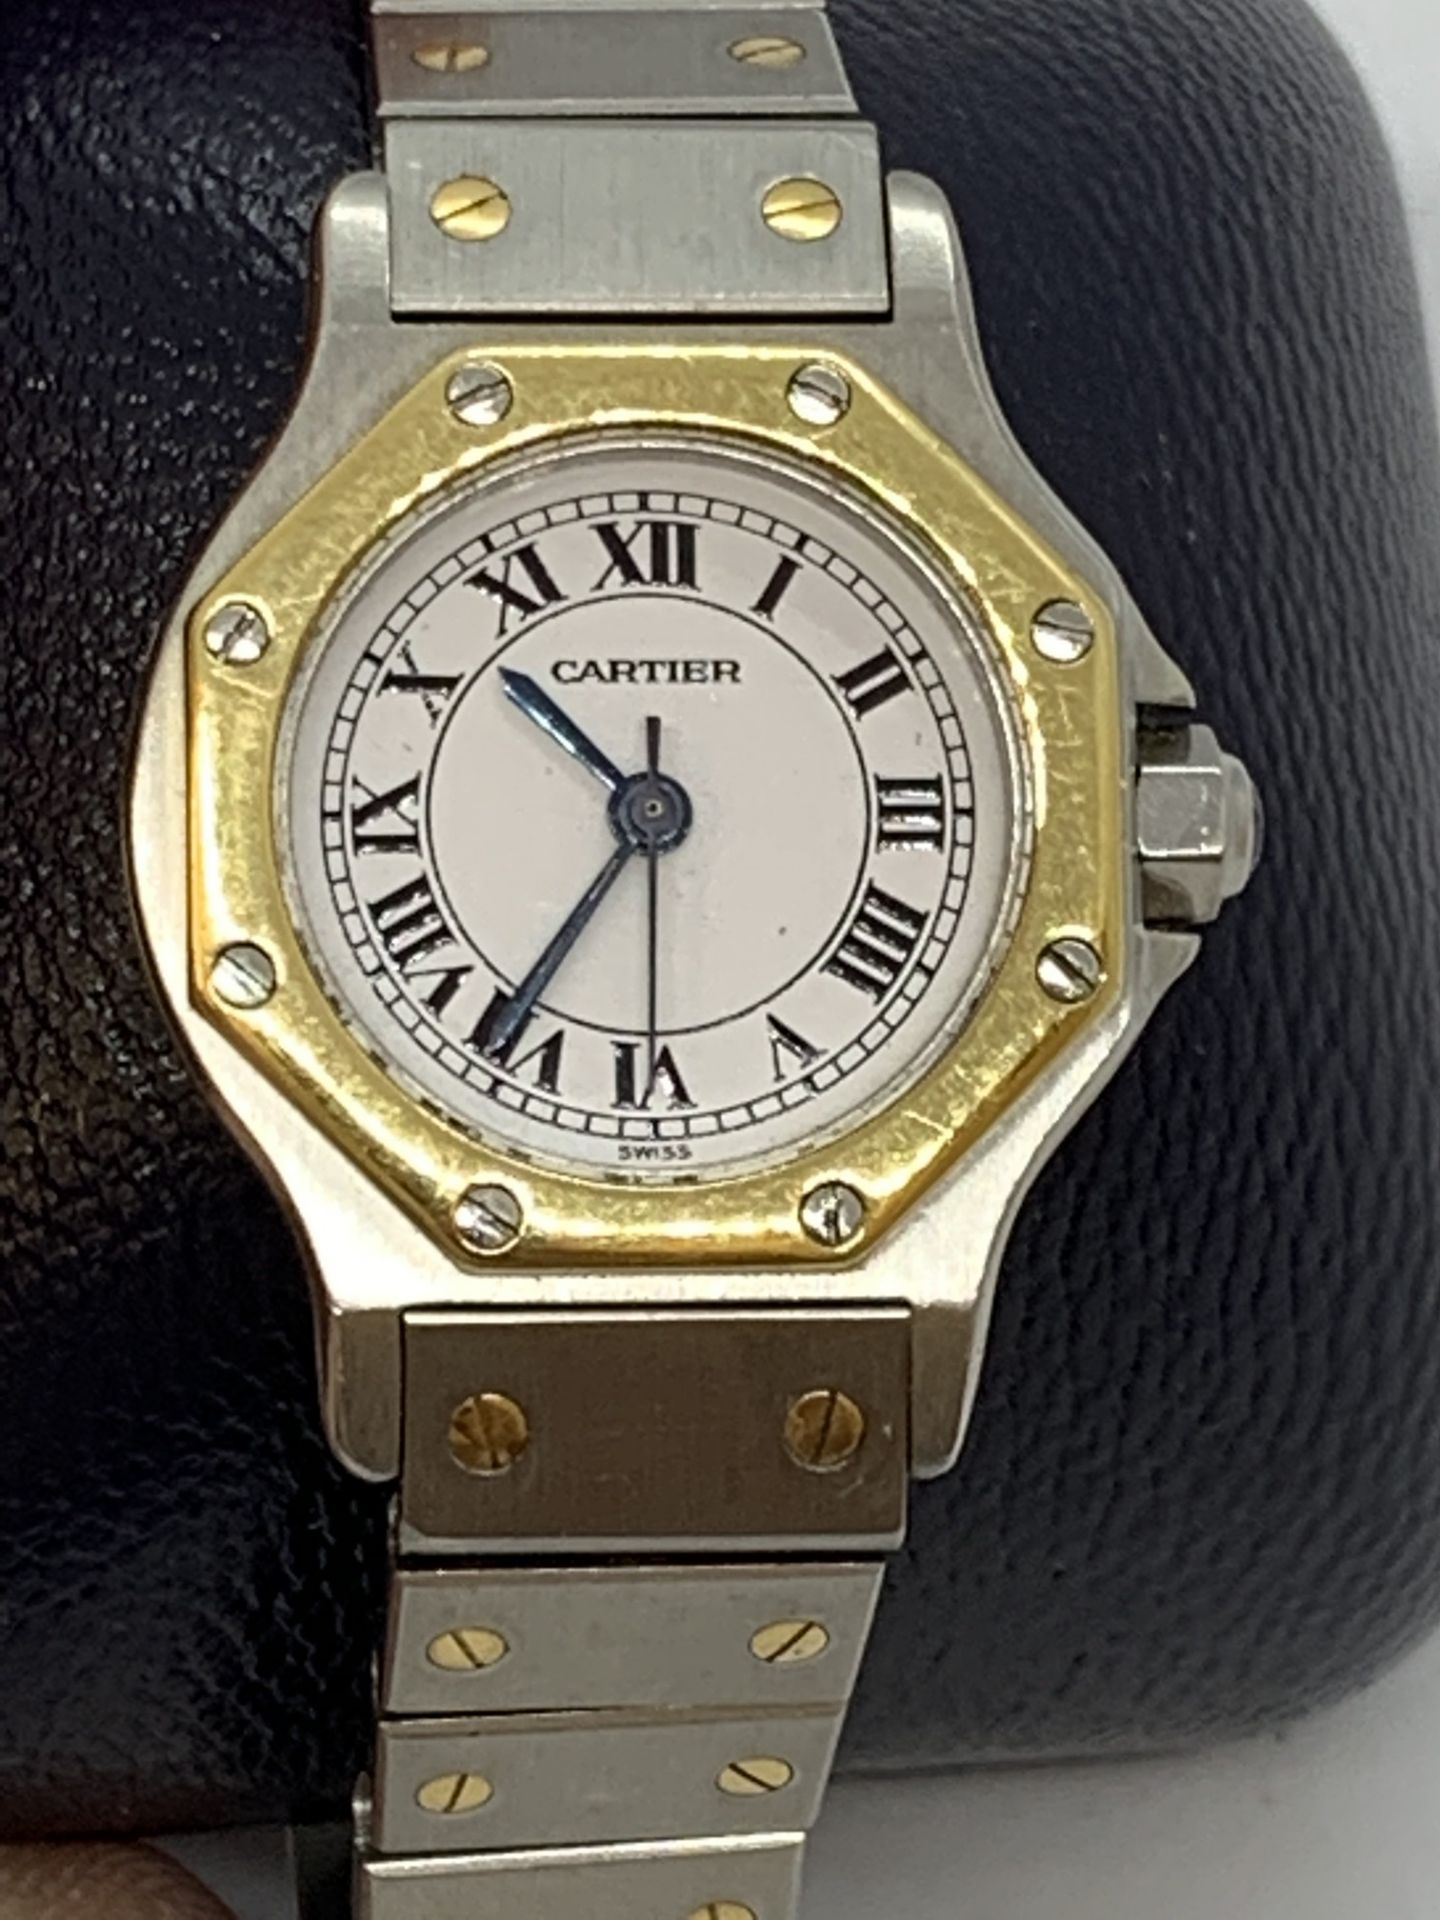 CARTIER STEEL & 18ct GOLD AUTOMATIC WATCH - Image 2 of 8